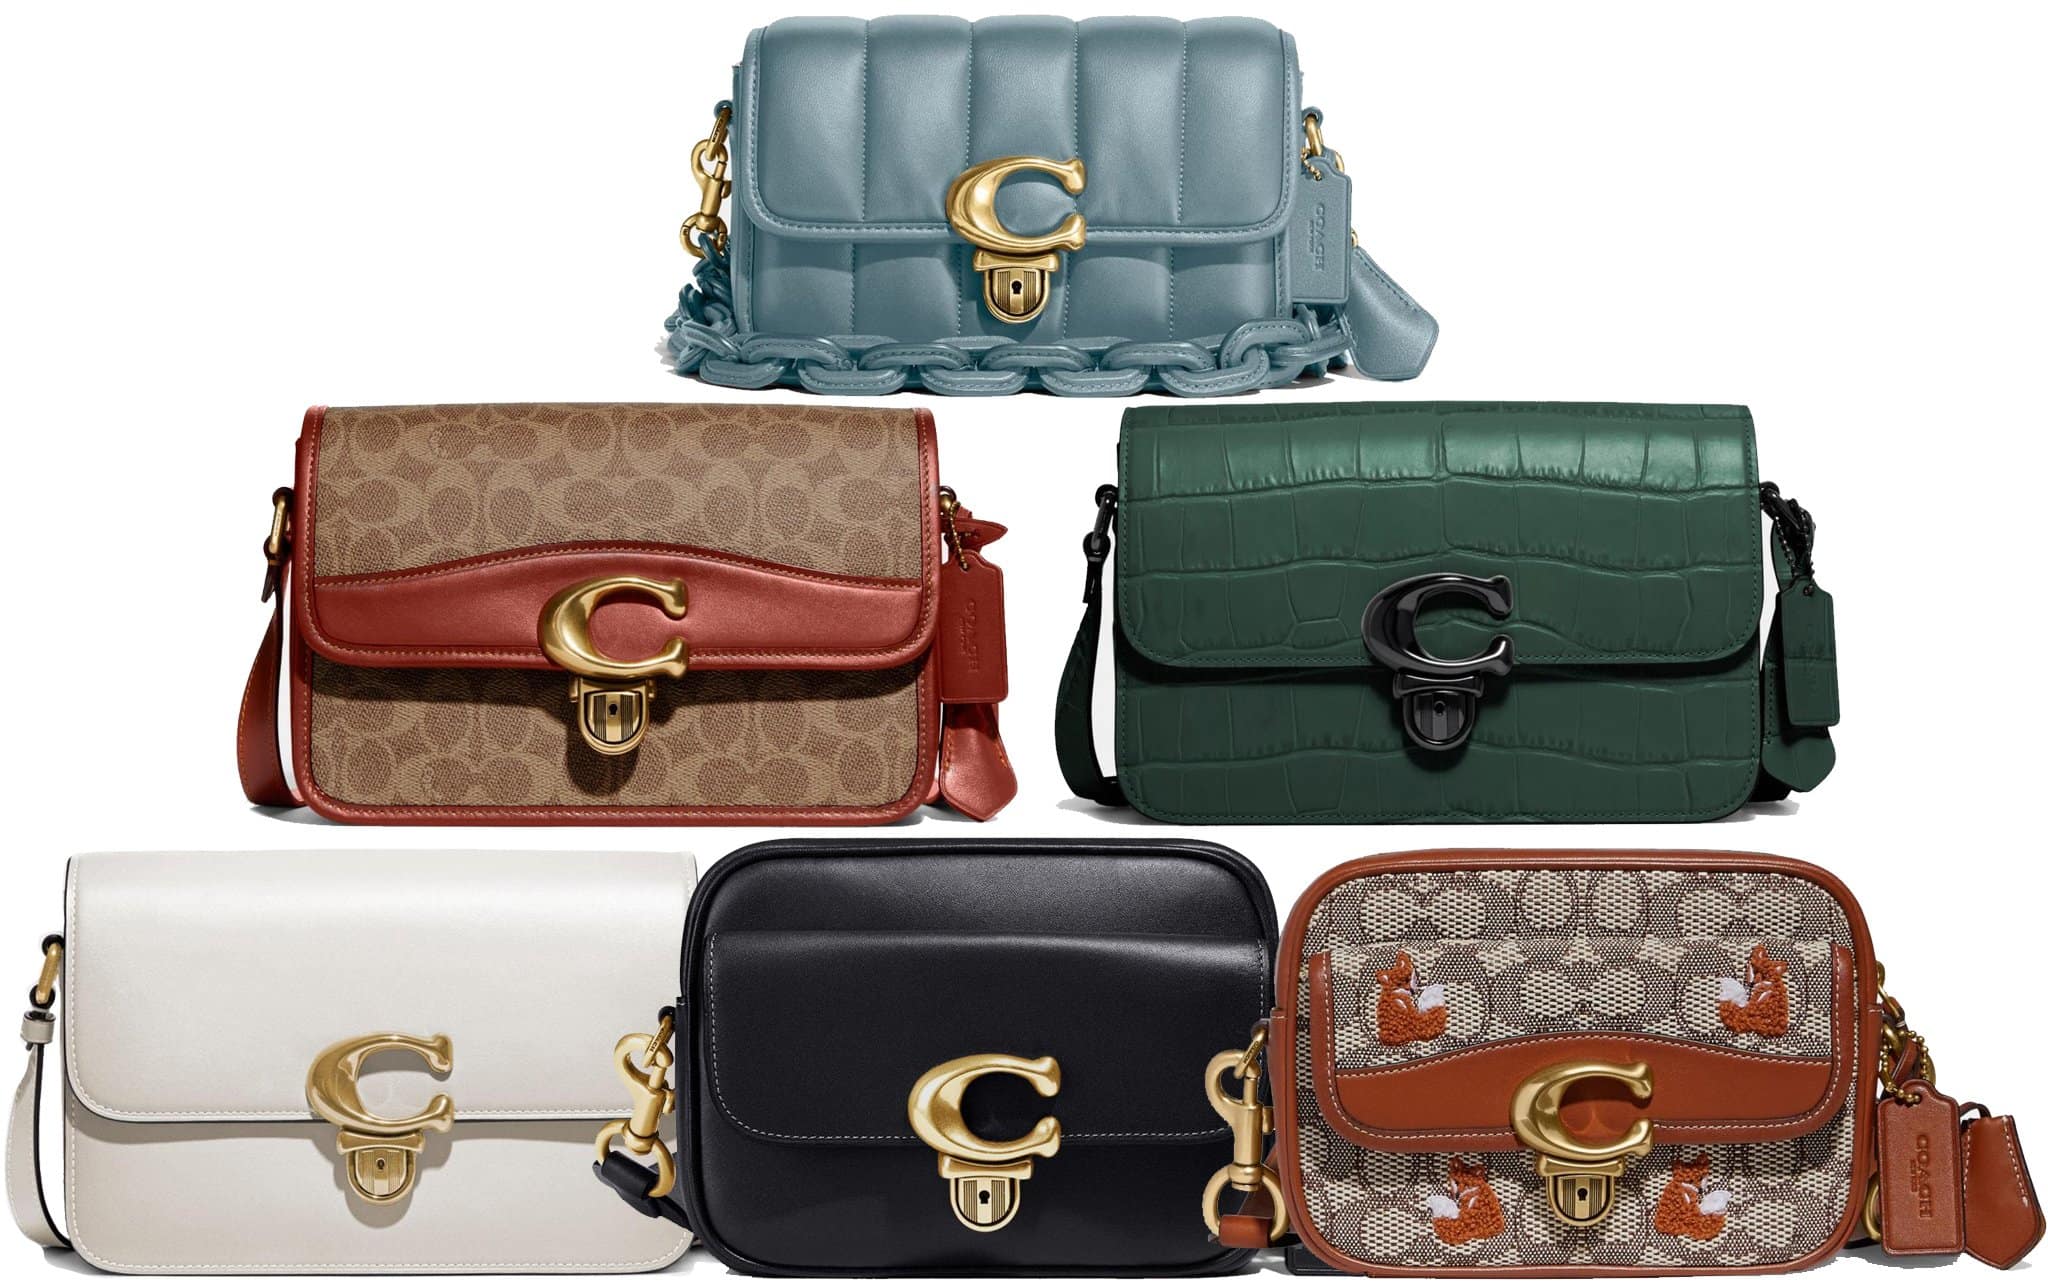 Coach's new Studio collection comes with a more expensive price point, from $450 to $495